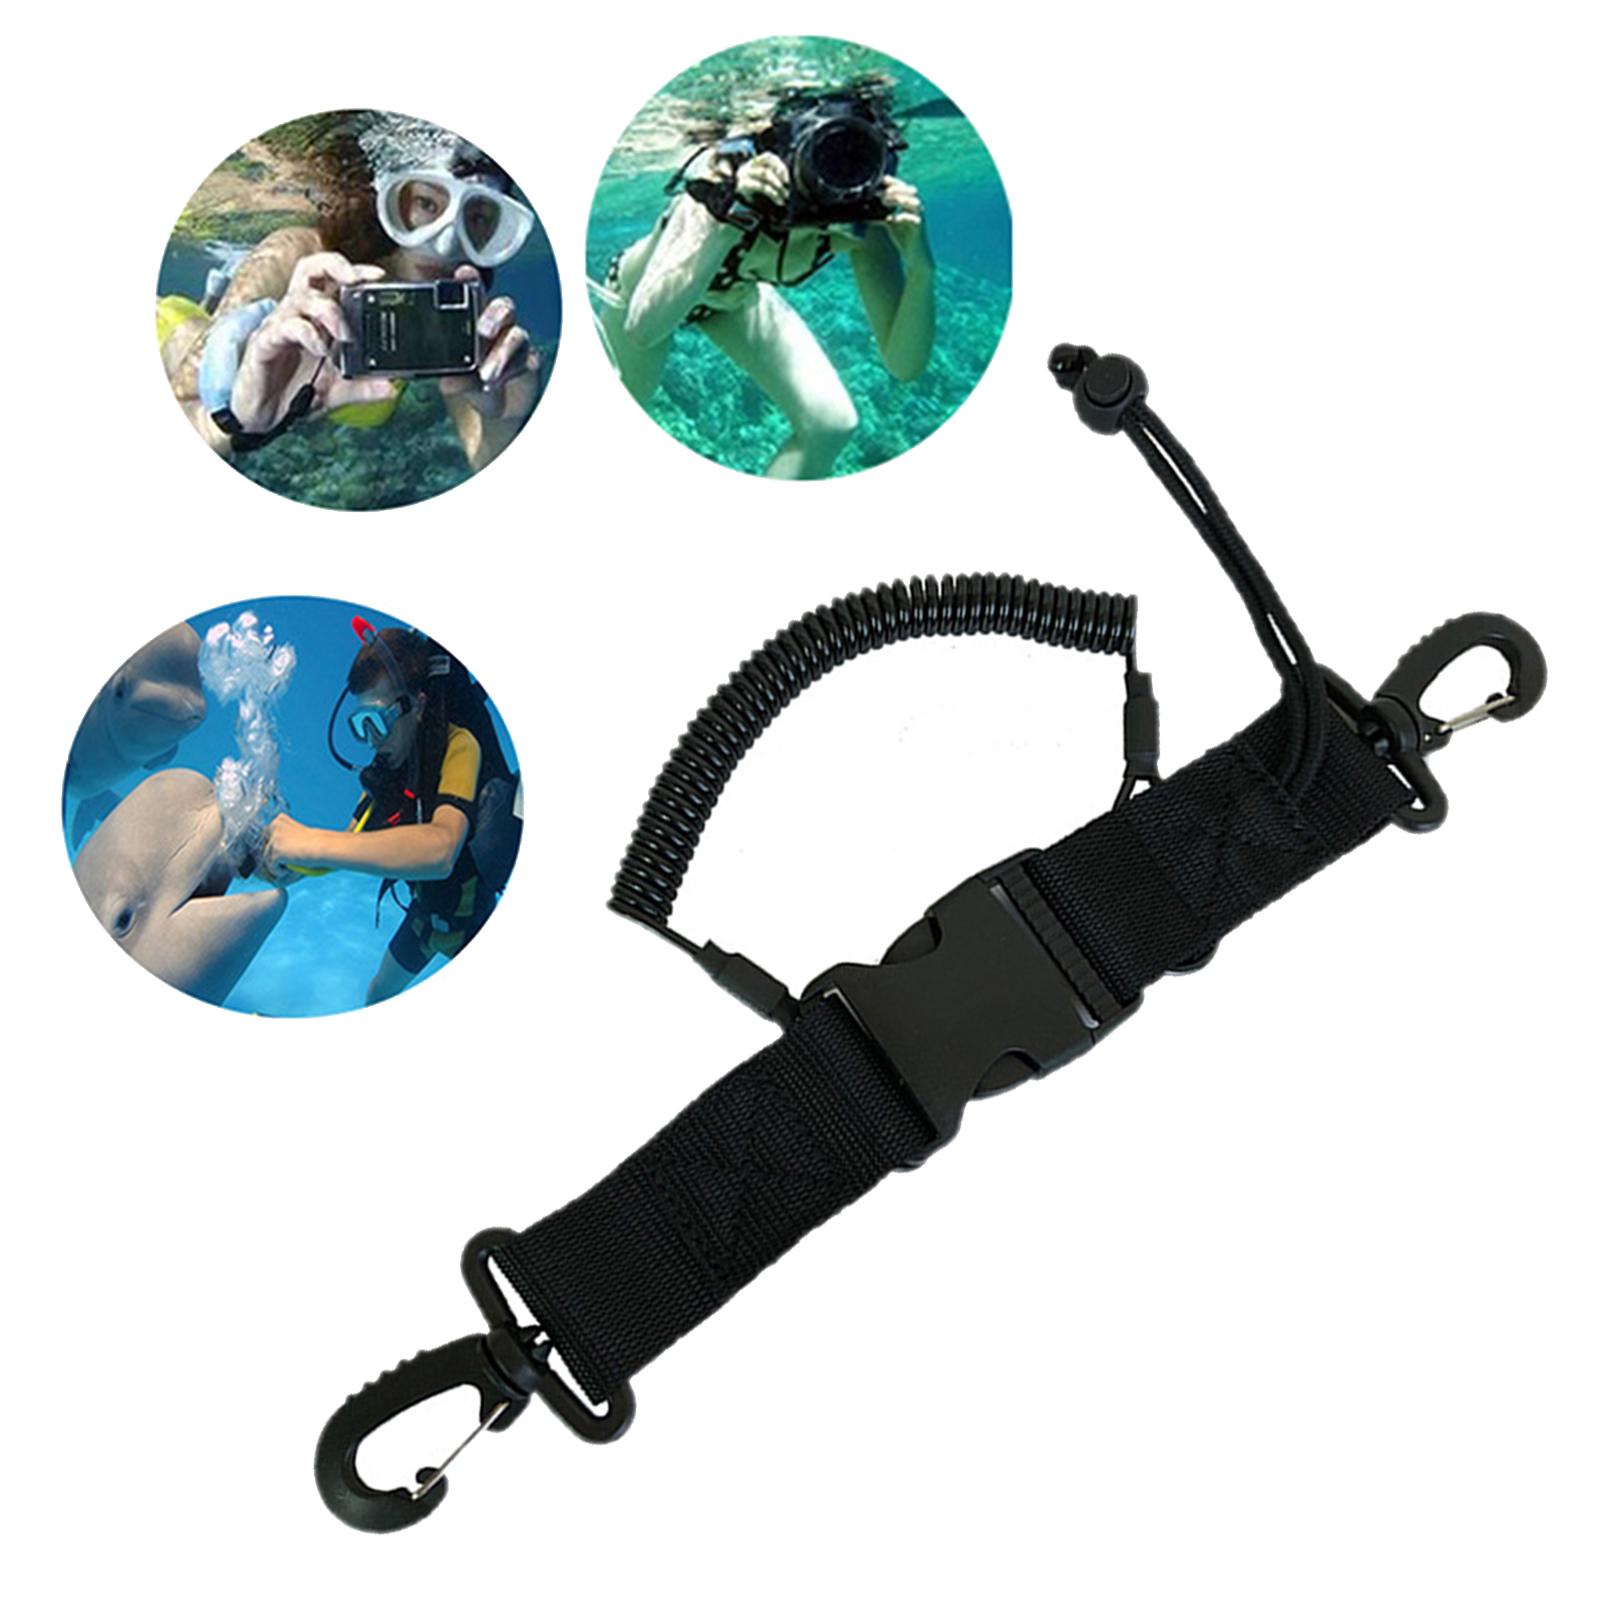 Scuba Diving Lanyard Coil Lanyard w/ Quick Release Buckles & Clip for Camera